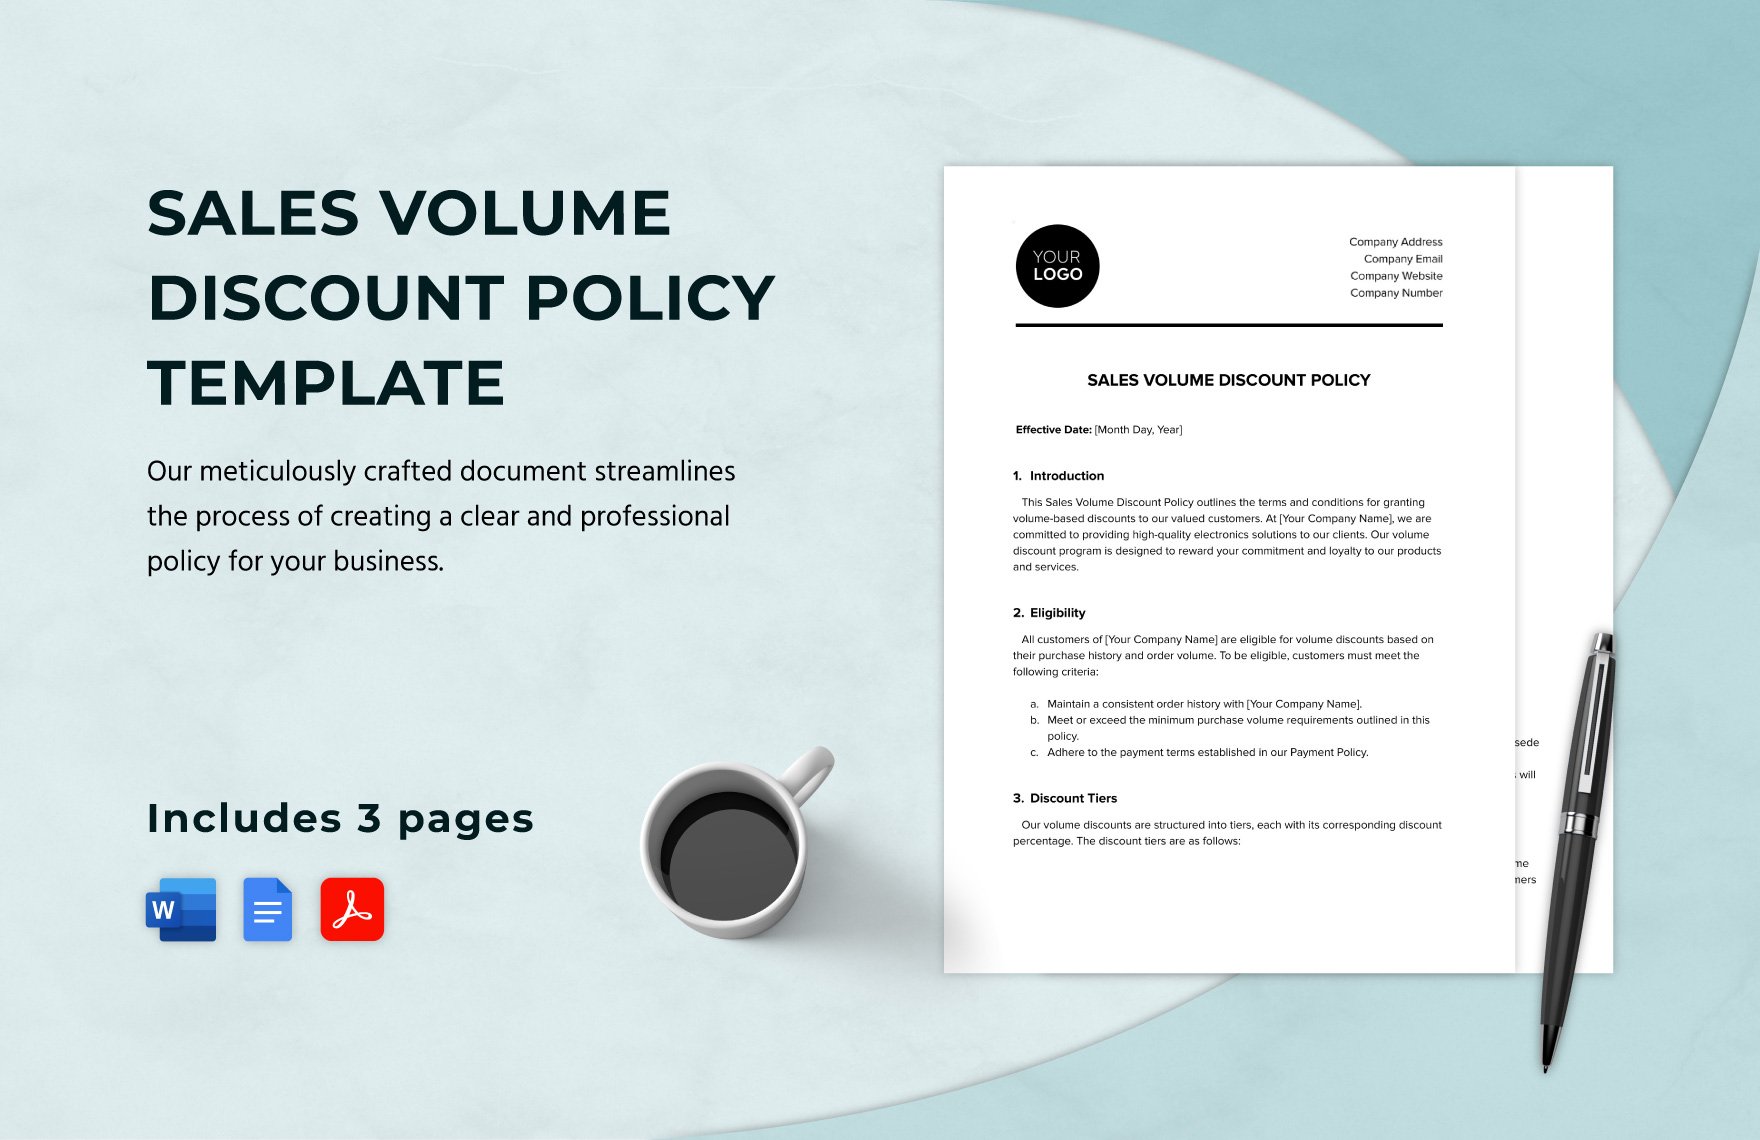 Sales Volume Discount Policy Template